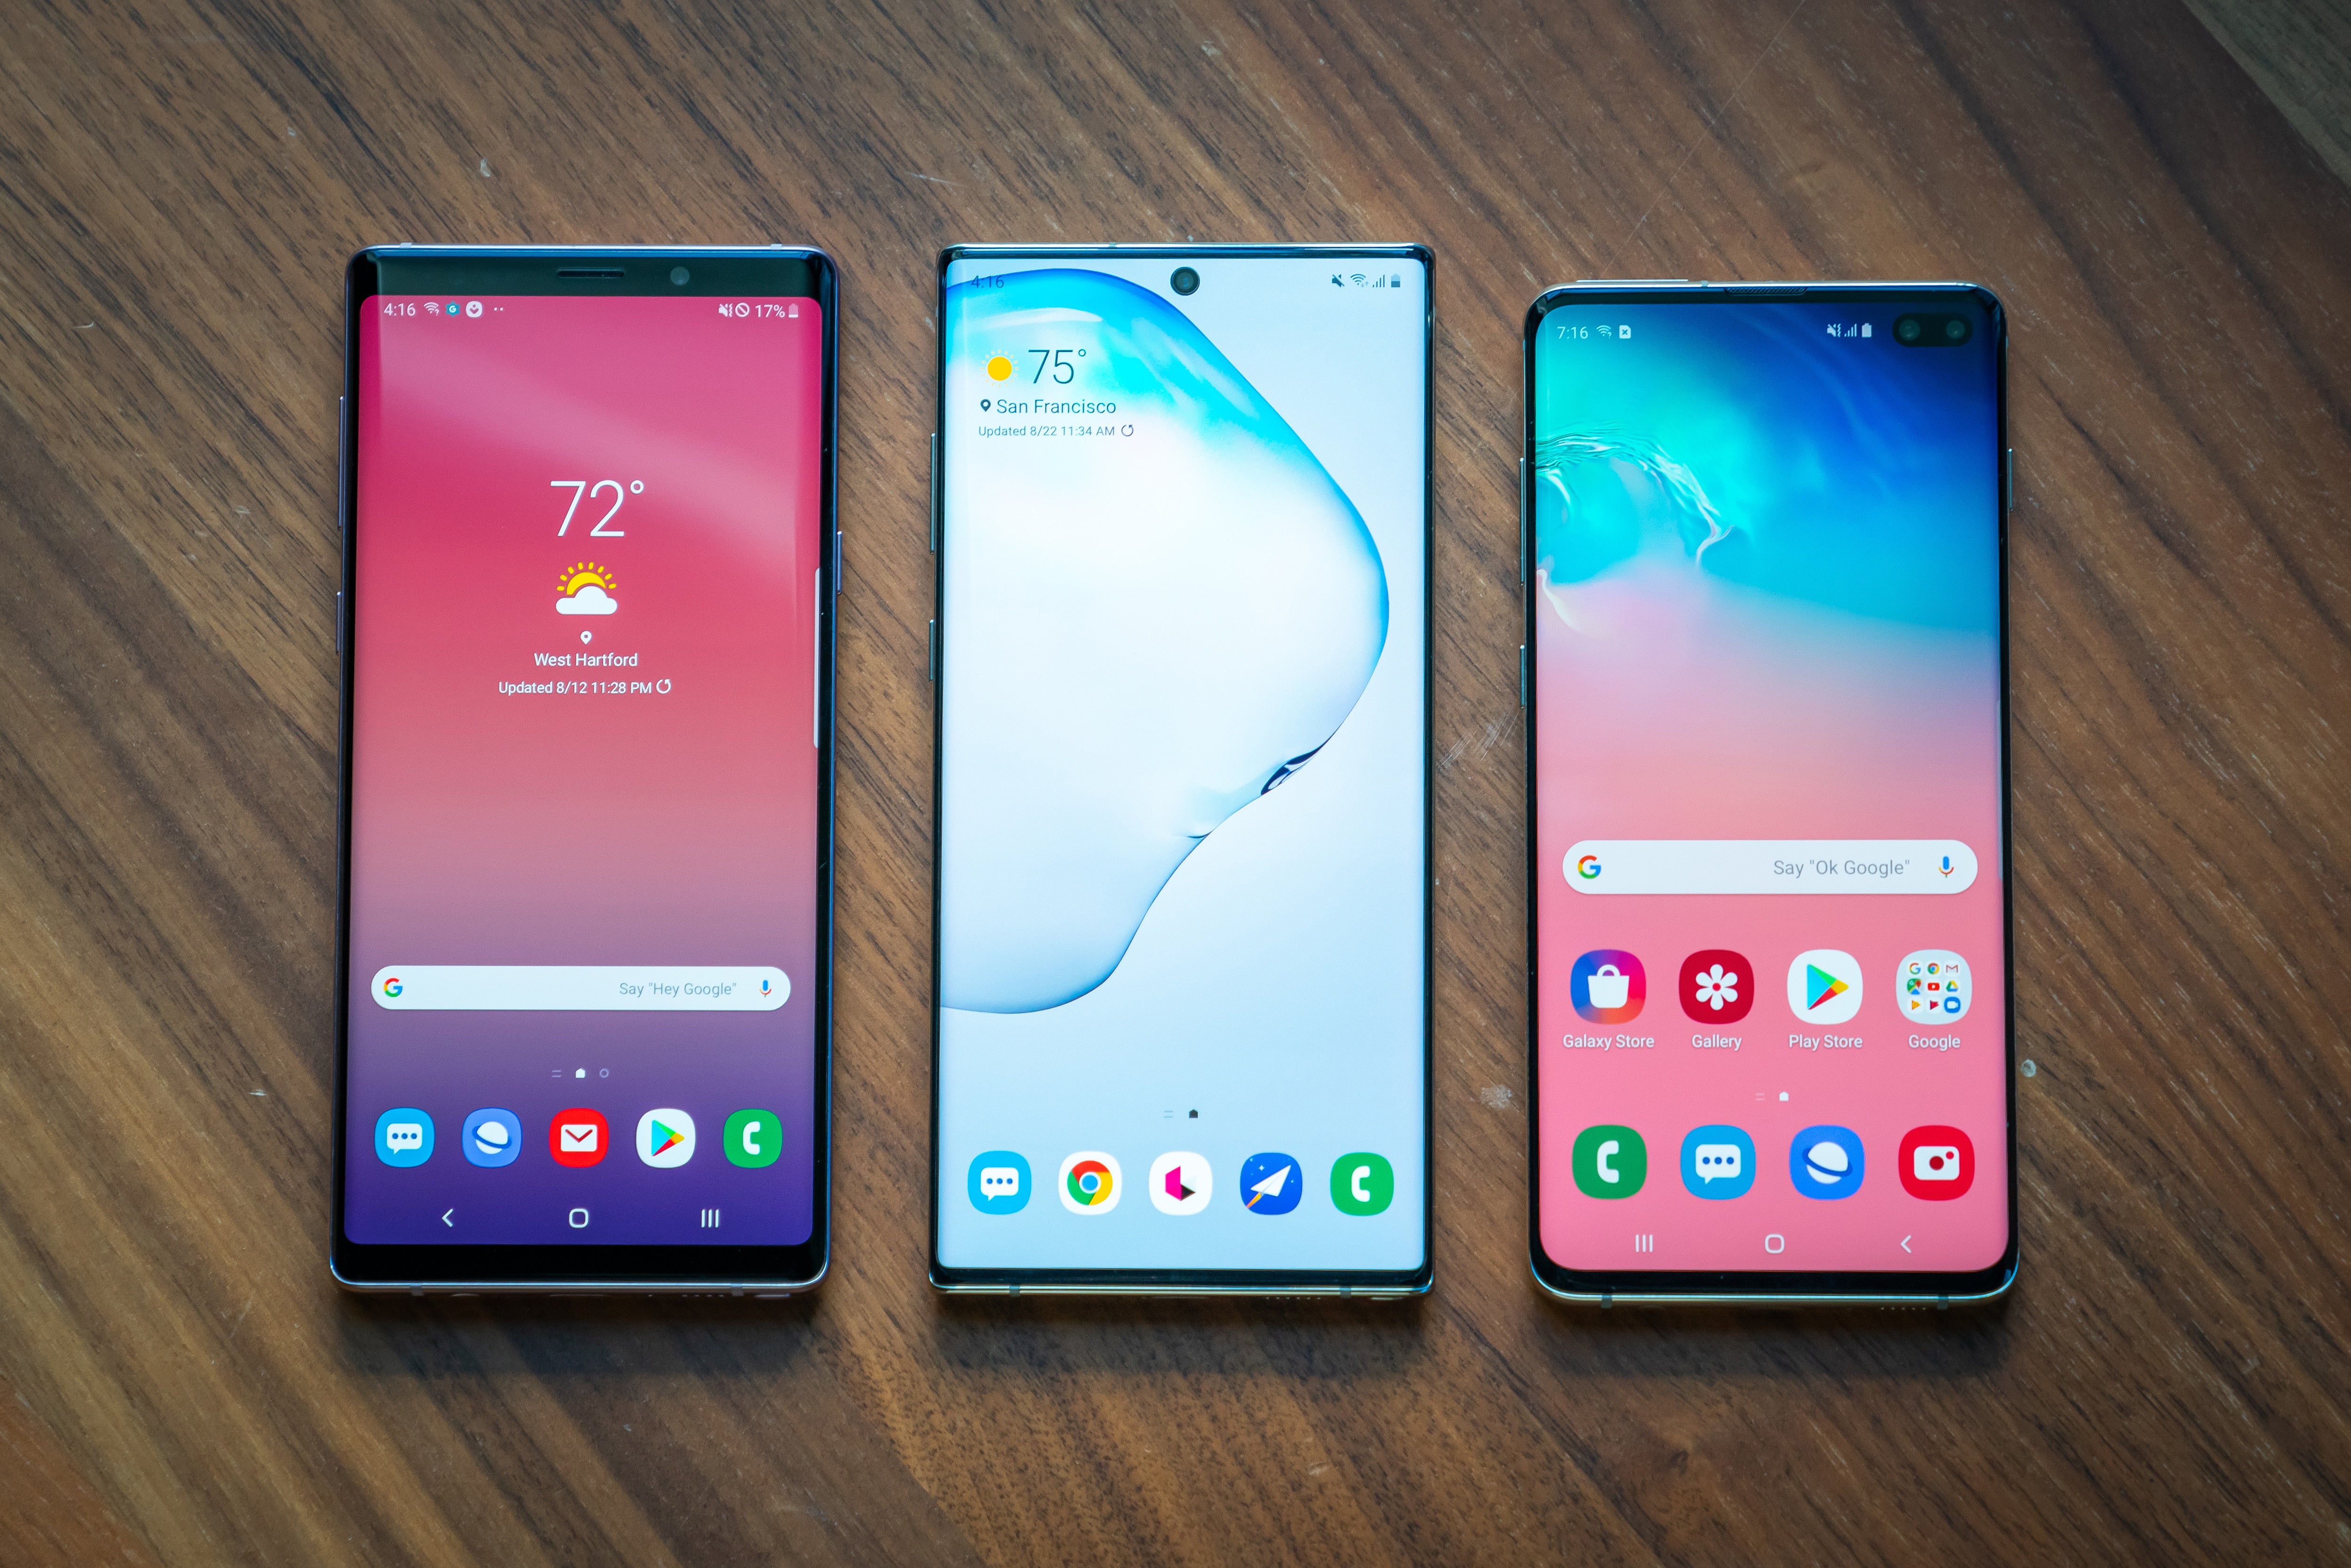 Samsung Galaxy Note 10+ review: If you have $1,100 to spend, this is